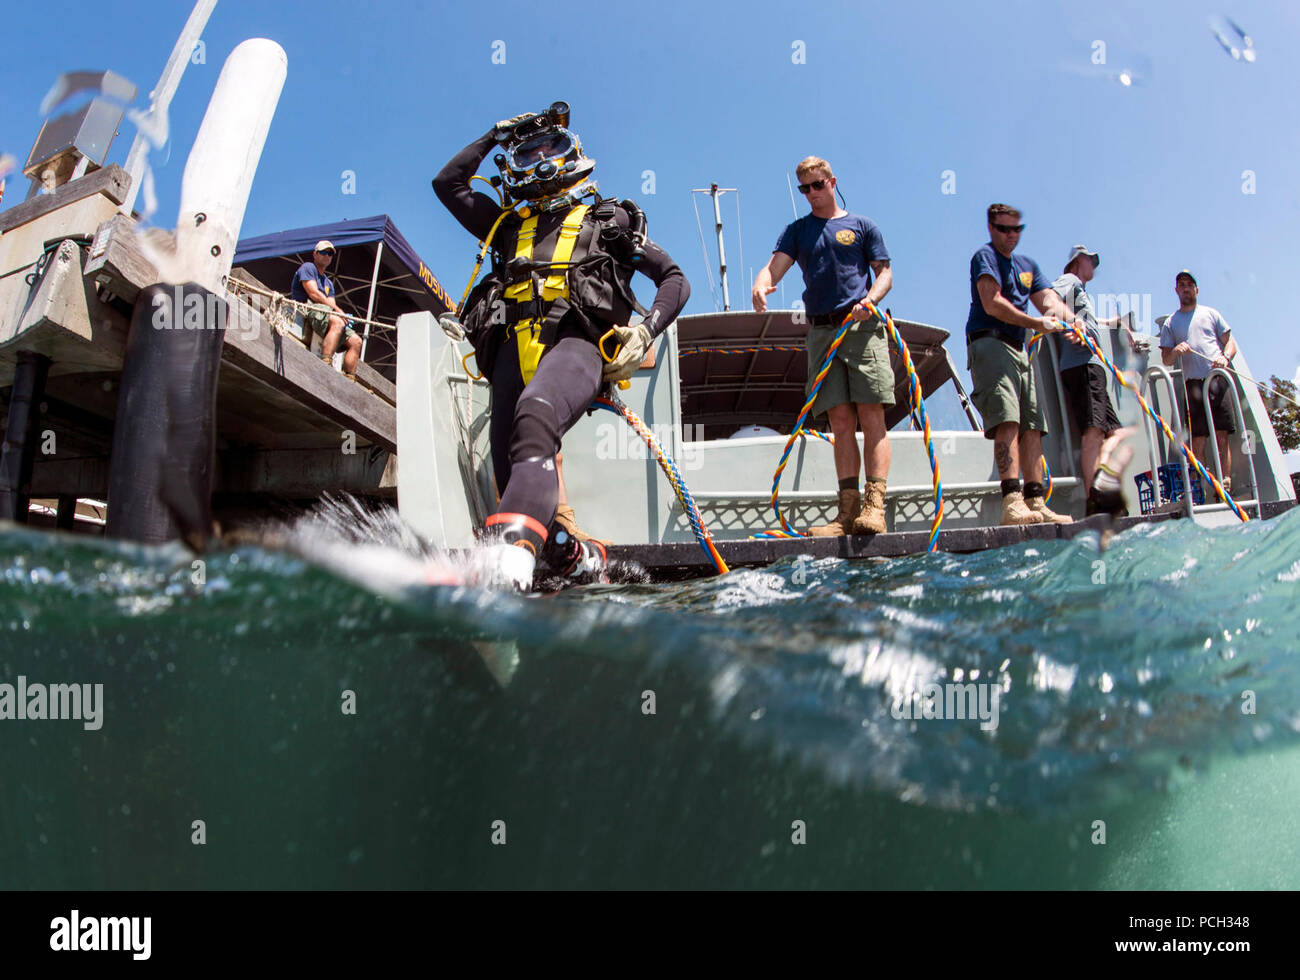 Petty Officer 2nd Class Corbin Stinson, assigned to Mobile Diving Salvage Unit (MDSU) 1, enters the water for a dive during Exercise Dugong 2016, in Sydney, Australia, Nov. 10, 2016. Dugong is a bi-lateral U.S Navy and Royal Australian Navy training exercise, advancing tactical level U.S. service component integration, capacity, and interoperability with Australian Clearance Diving Team (AUSCDT) ONE. Stock Photo